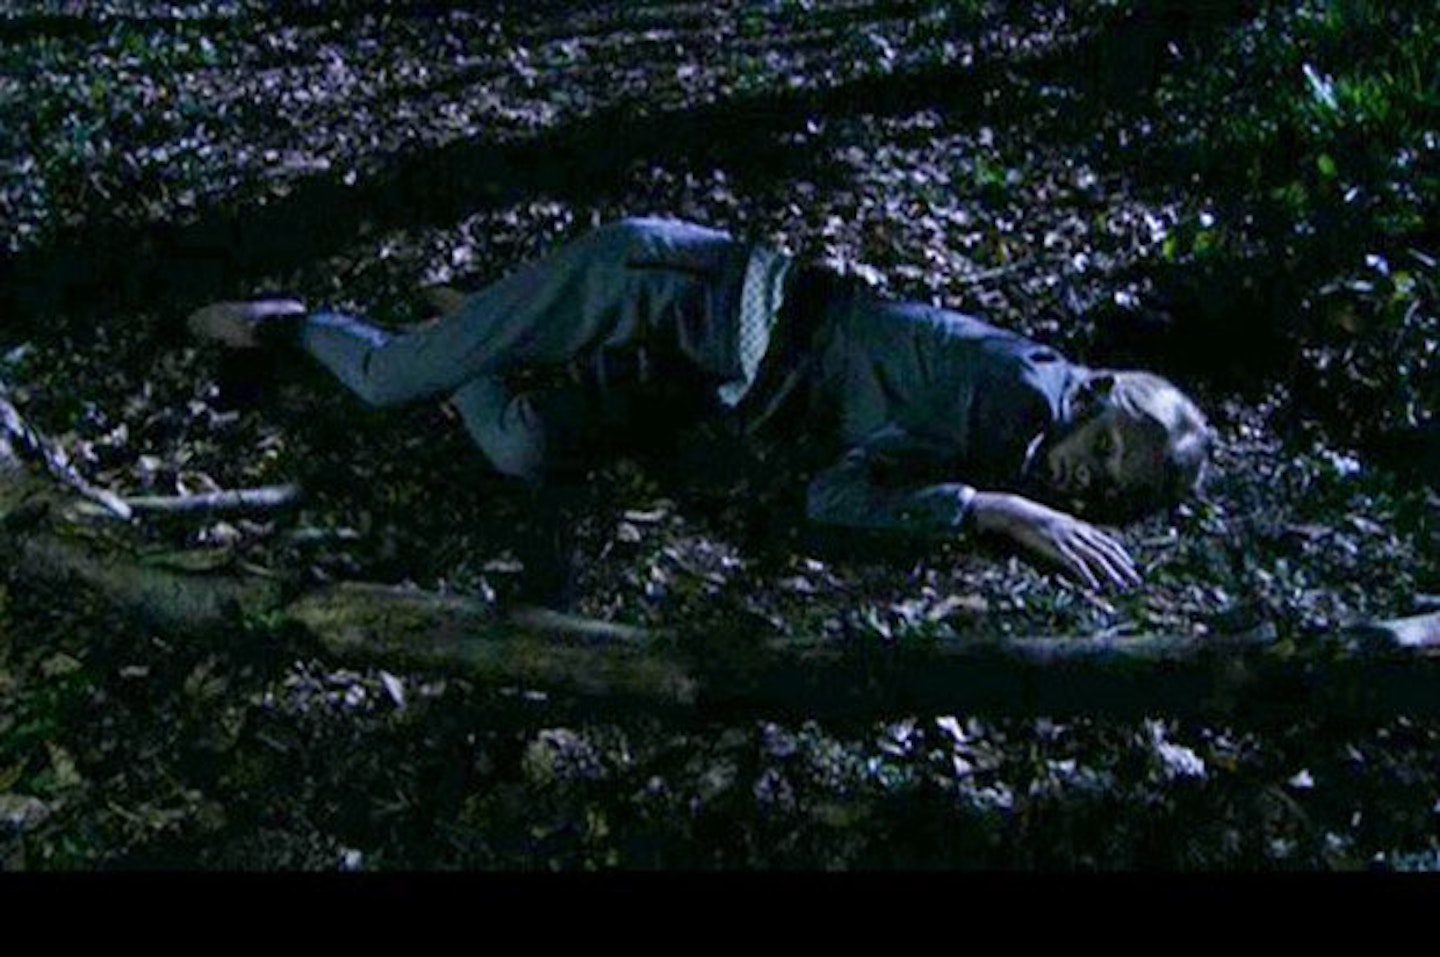 EastEnders: Who killed Lucy Beale?